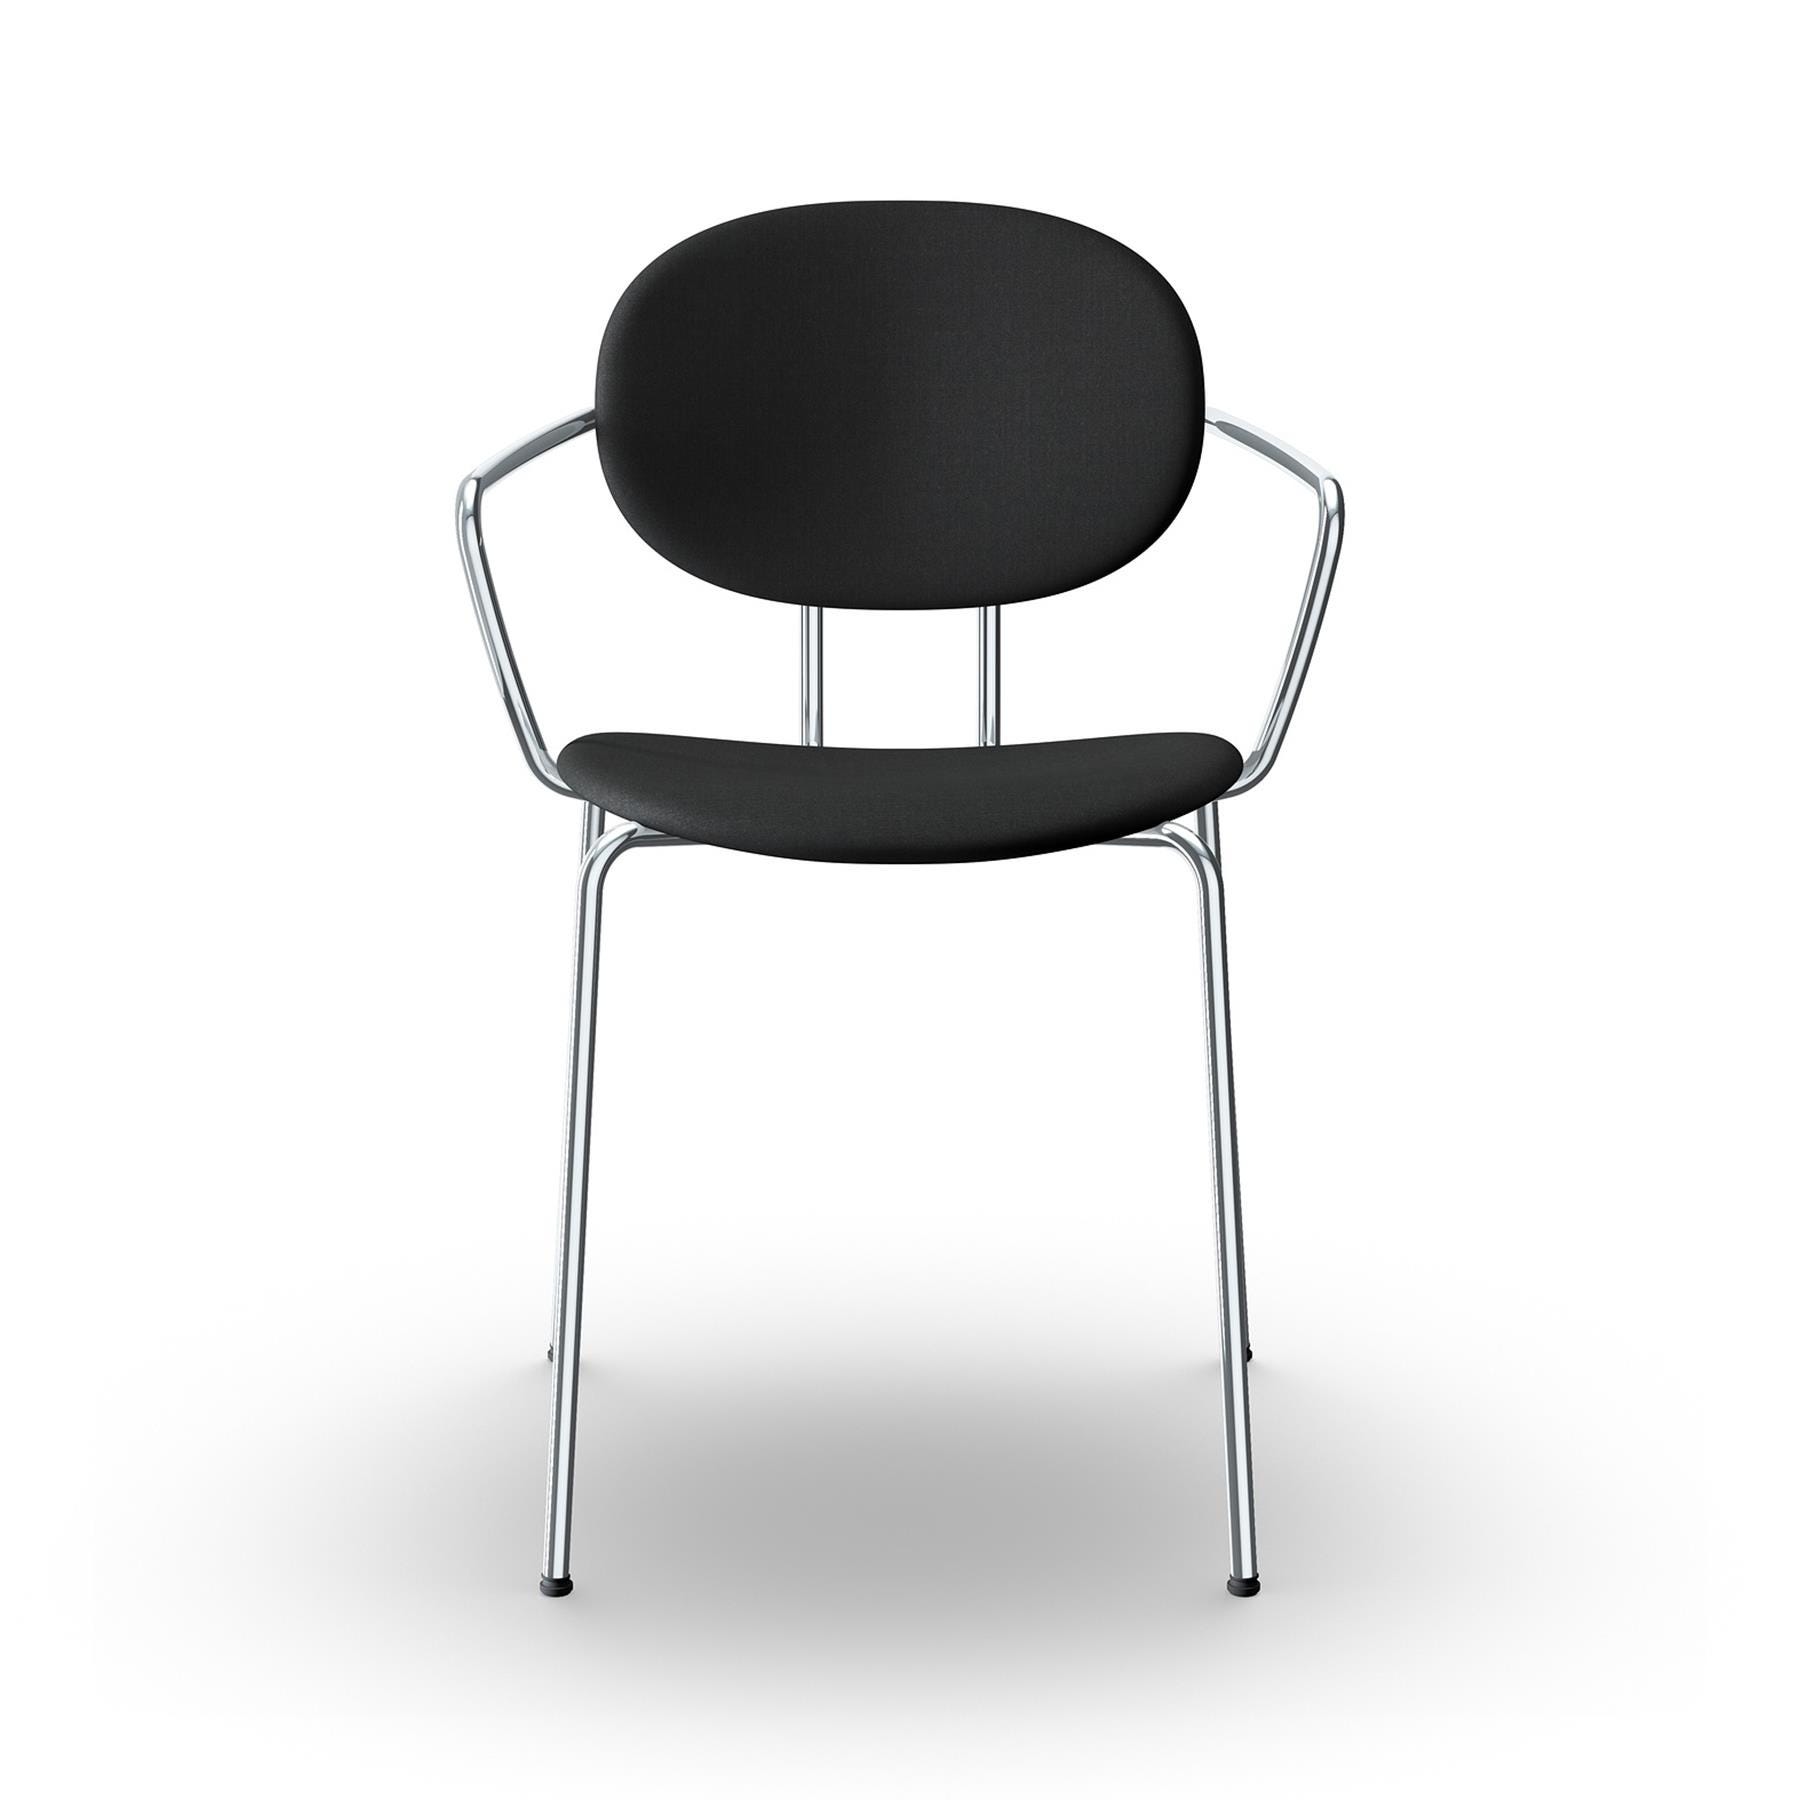 Sibast Piet Hein Dining Chair Fully Upholstered With Arms Chrome Remix 383 Black Designer Furniture From Holloways Of Ludlow